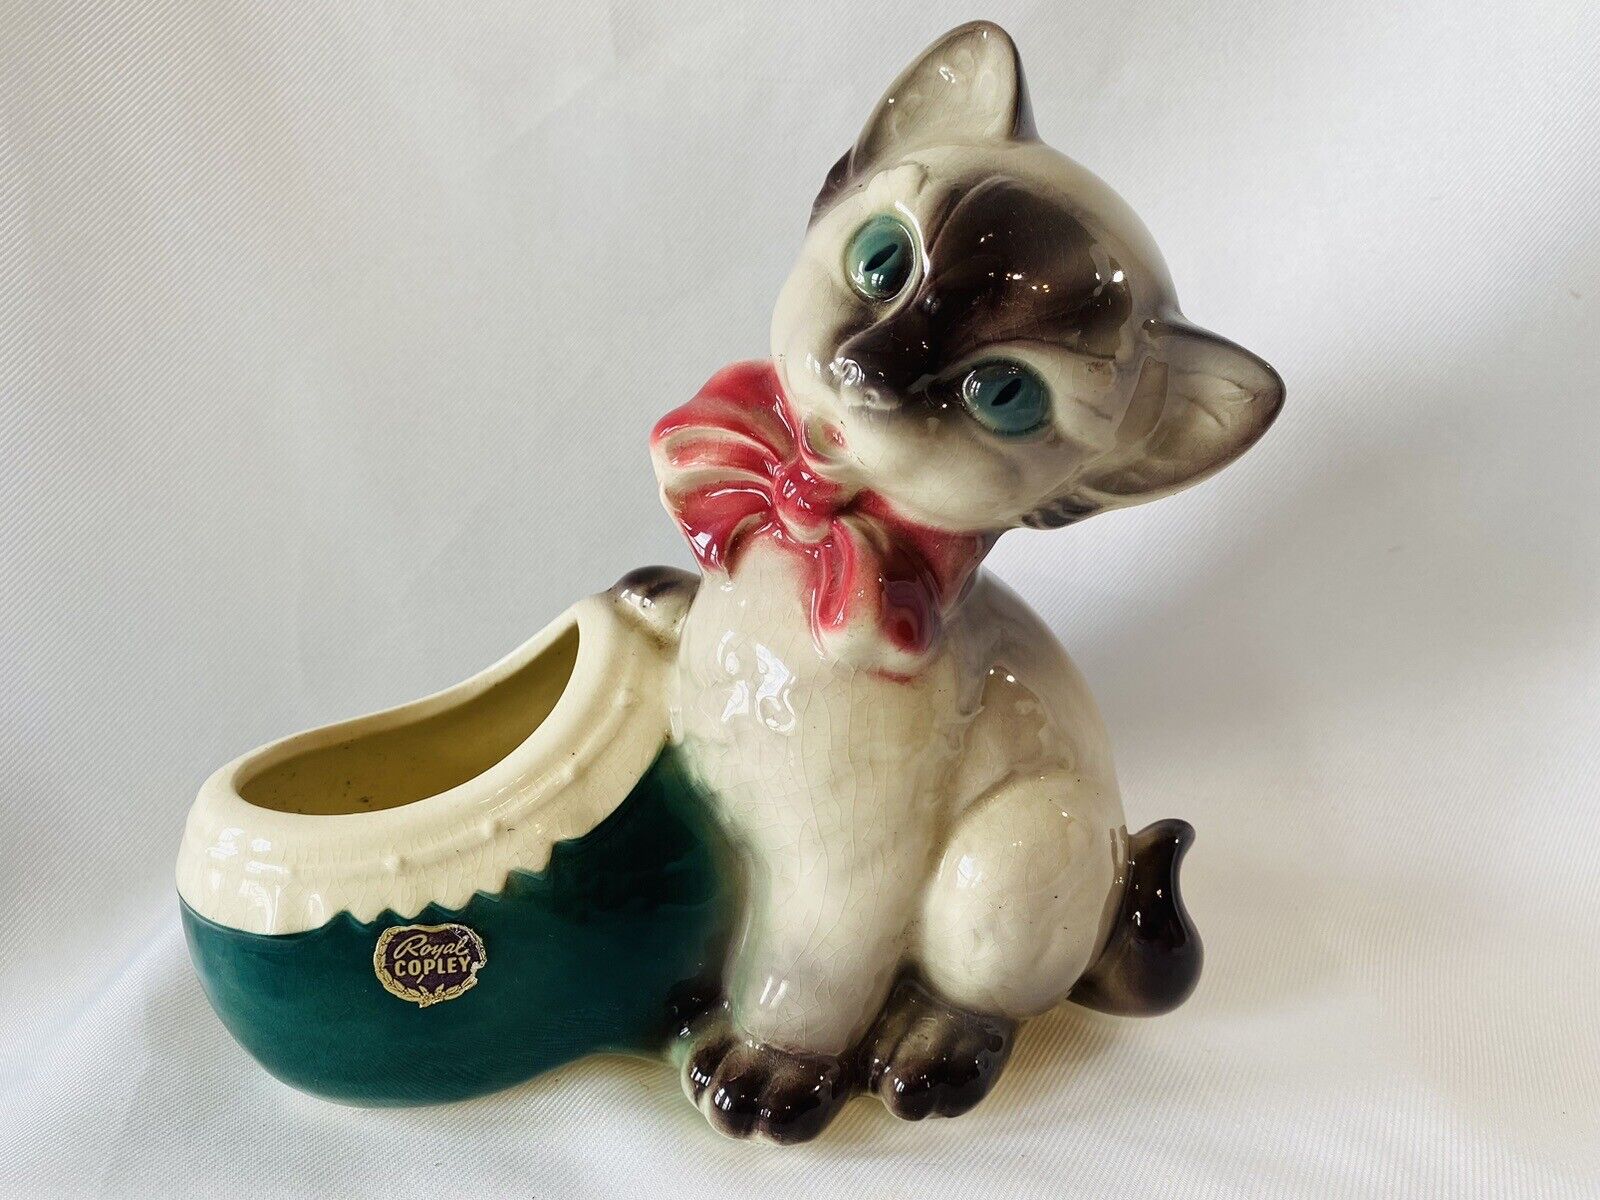 Vintage Royal Copley Cat With Shoe Planter 8” Tall With Original Tag